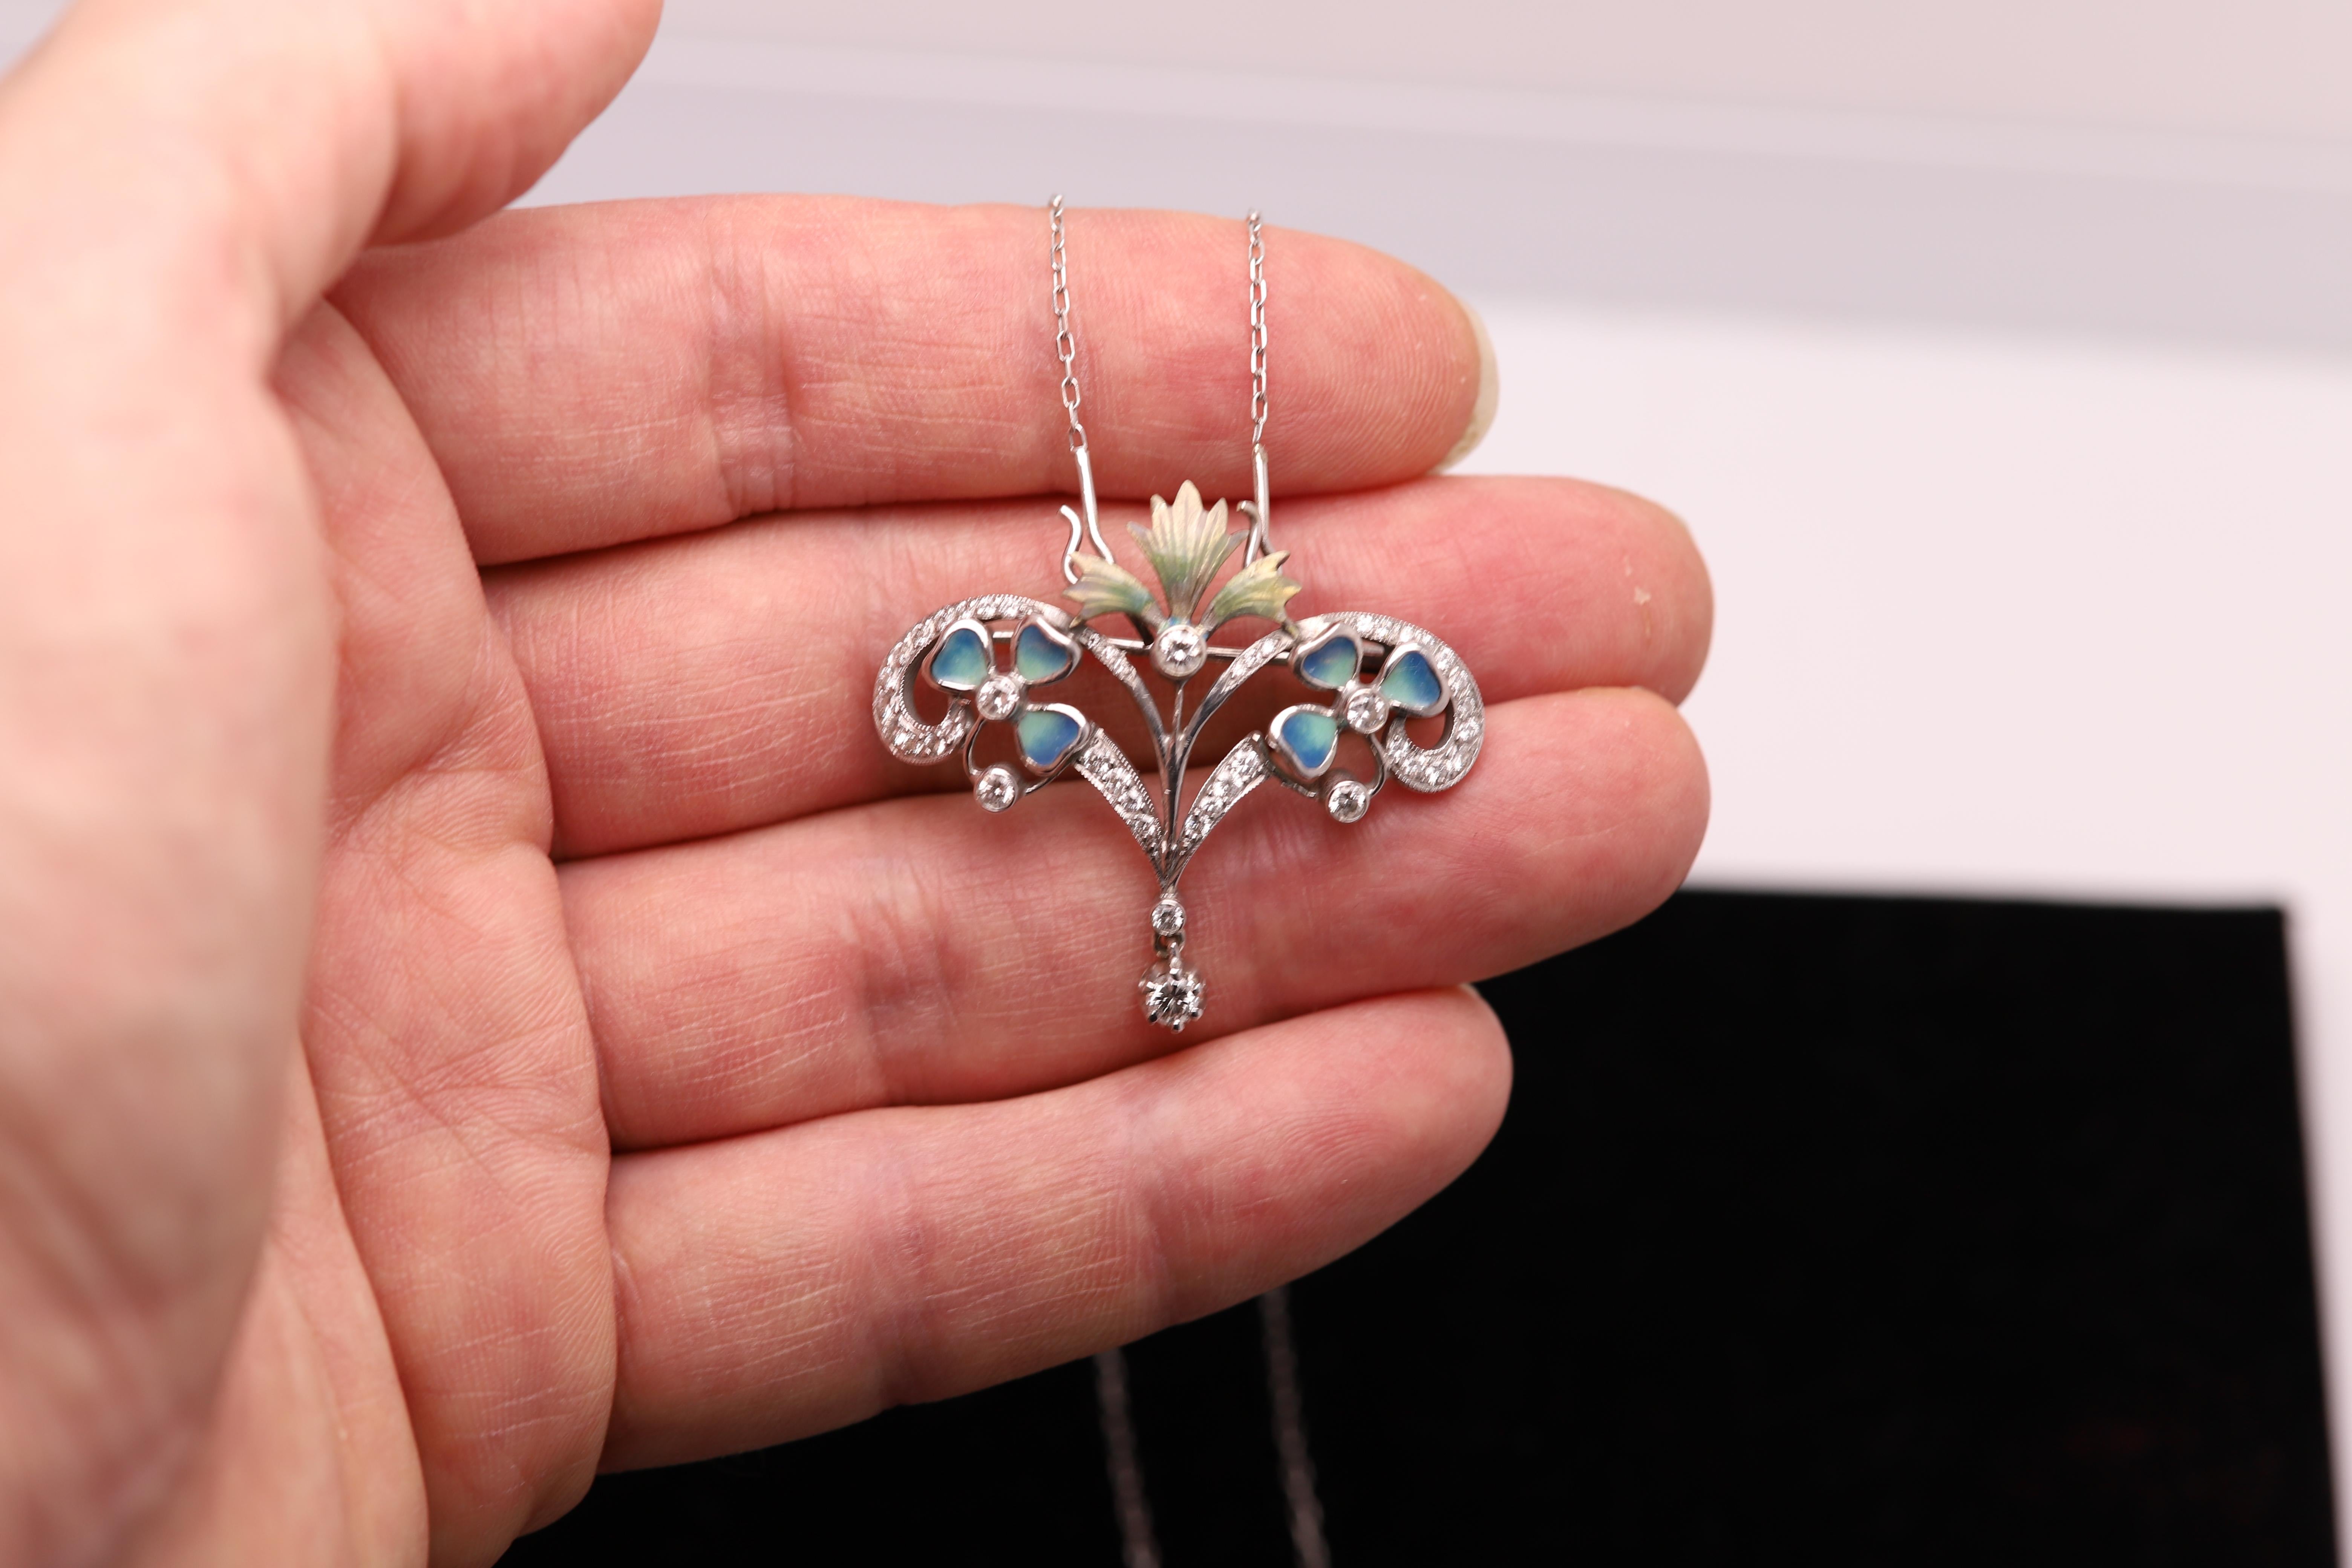 Vintage Hand made in Spain
Art Enamel - Diamond Necklace and brooch
18K White Gold 
approx size 1.50' inch wide and 1.25' inch high
Diamonds total 1.00 carat  nice white sparkling (seems around the GH-VS)
Total Weight 10.3 grams
Style is based from